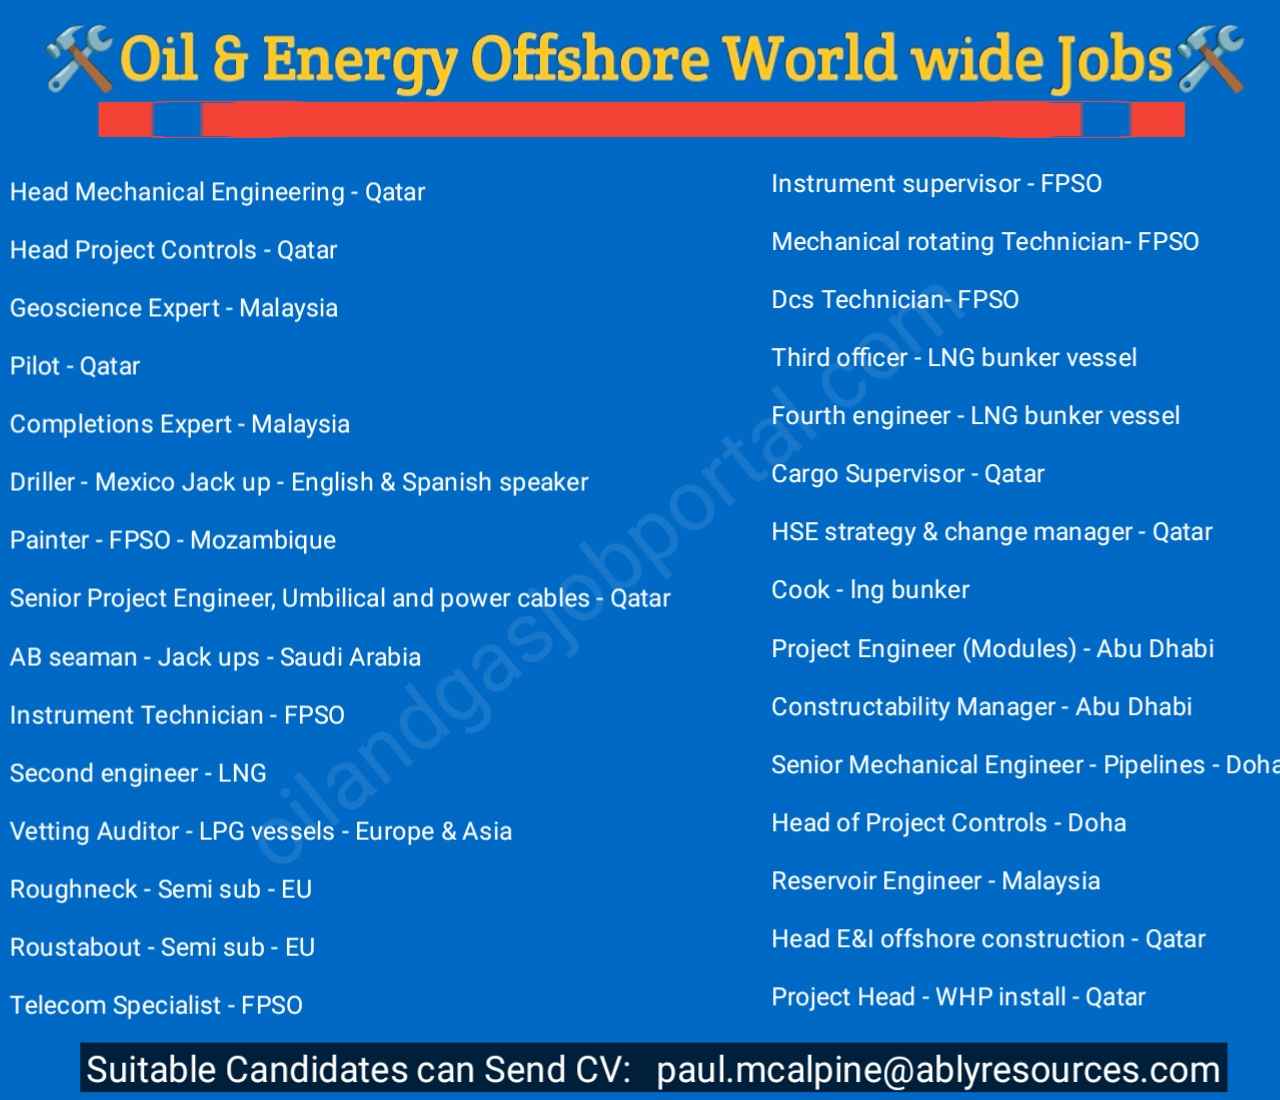 Ably Resources Ltd are looking for great people for Oil and Energy Offshore Jobs